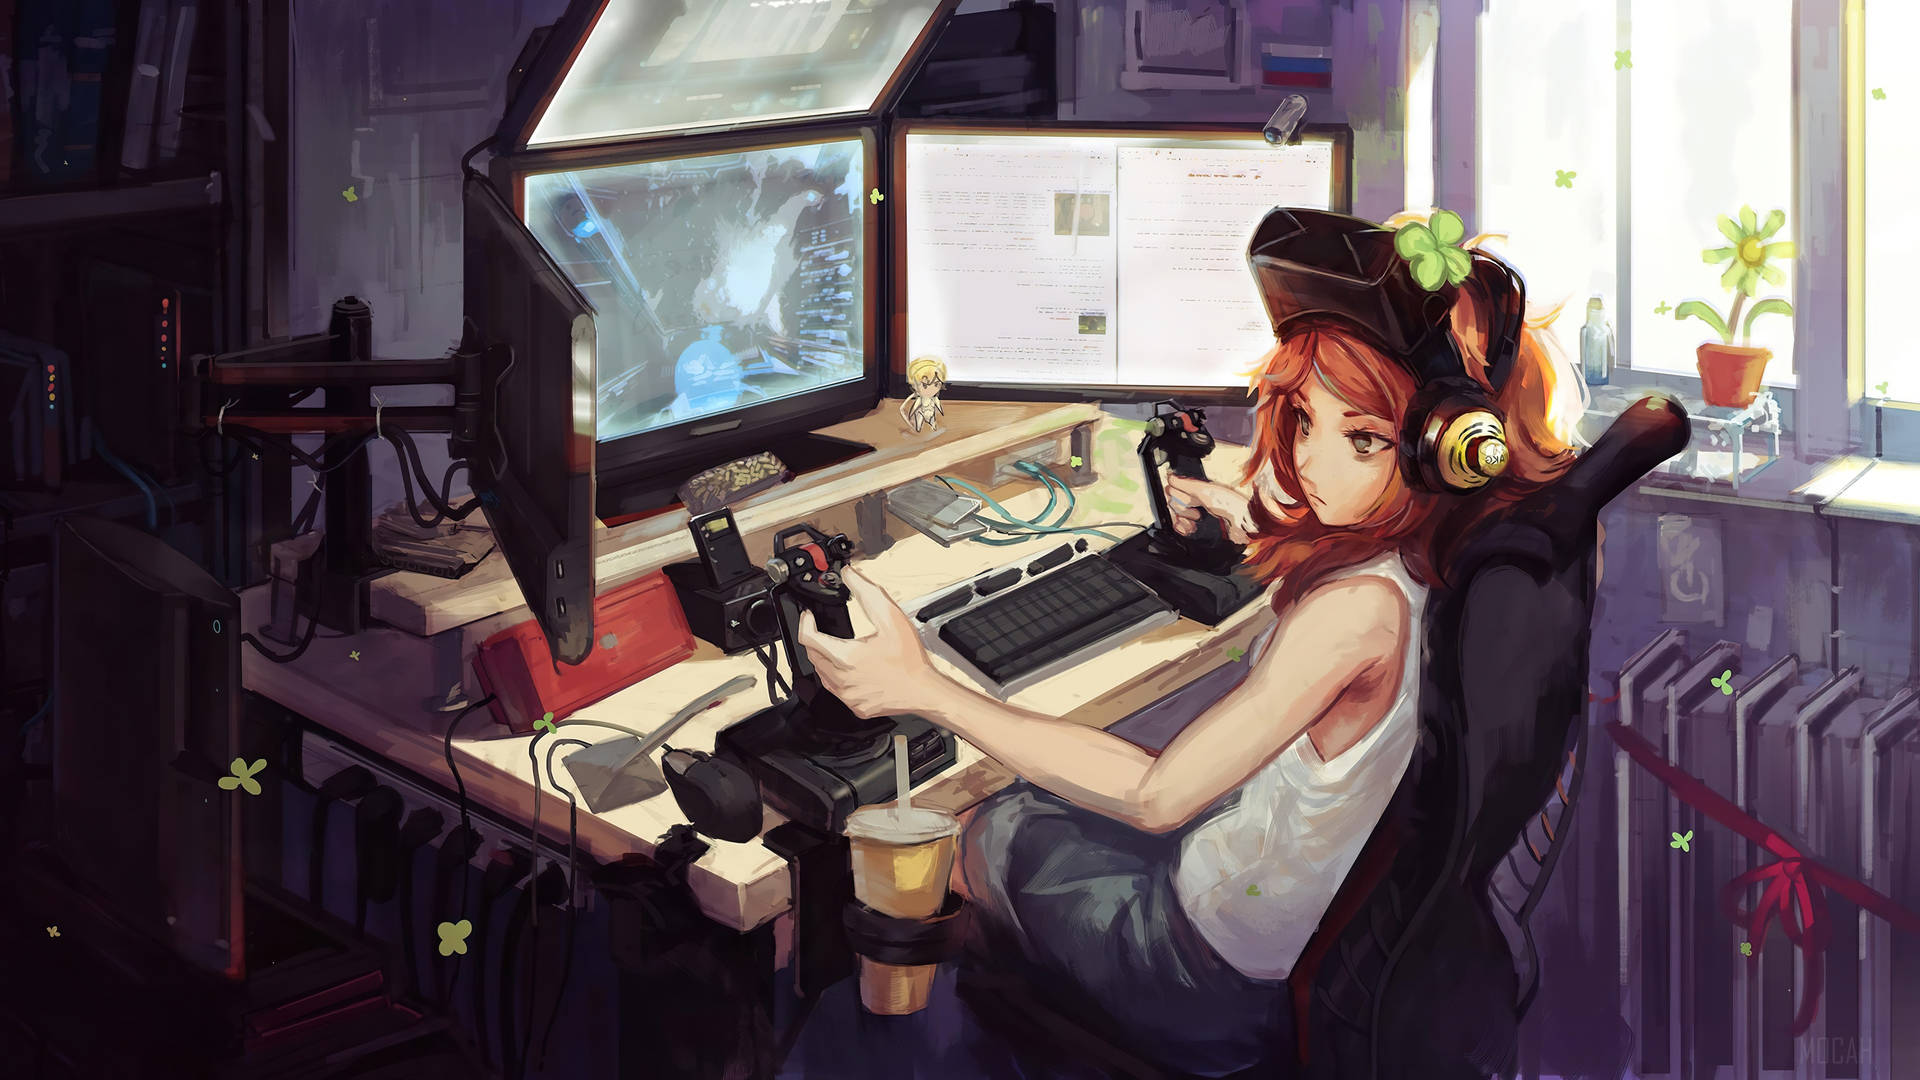 Anime Redhead Girl With Gaming Laptop Workstation Picture